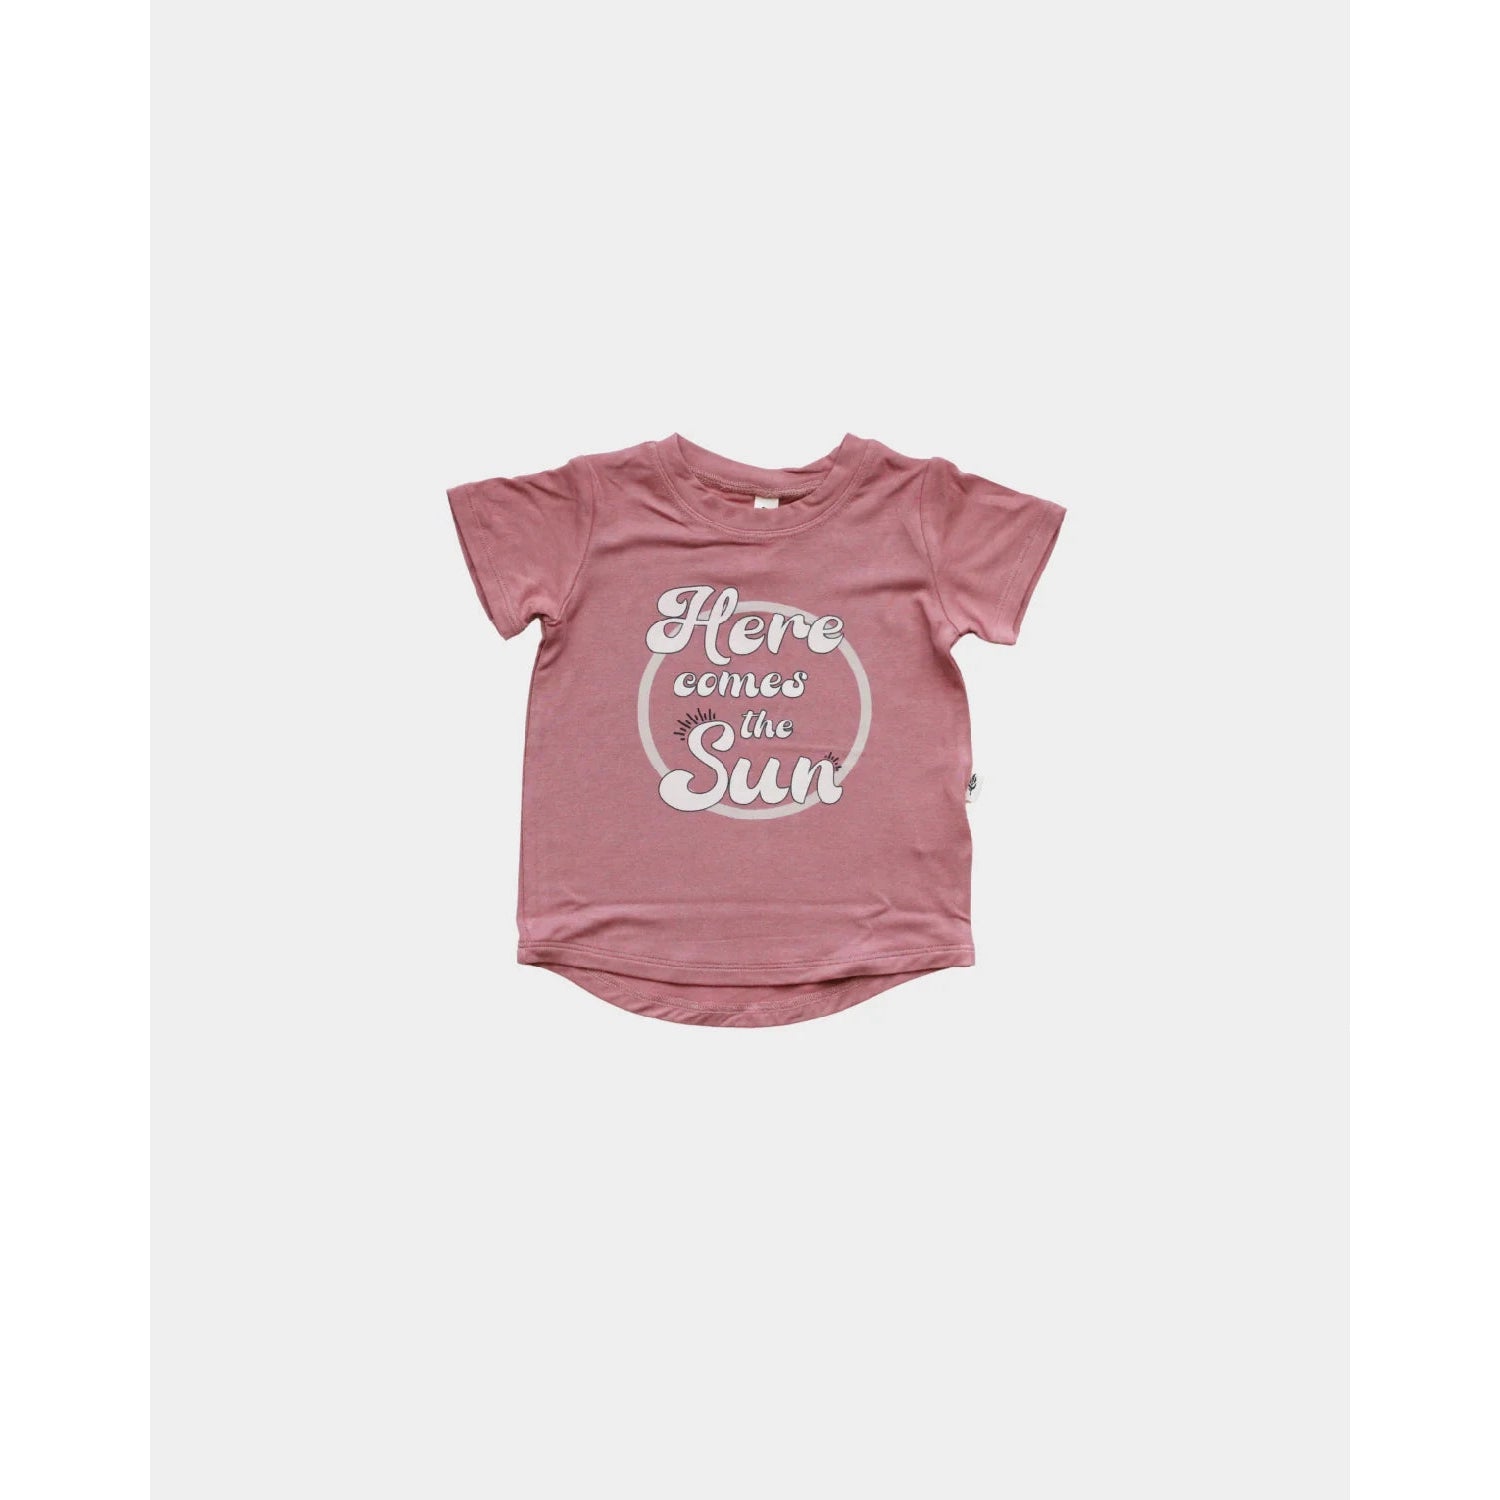 Baby Sprouts Here Comes the Sun Screen Printed Tee-Baby Sprouts-Little Giant Kidz